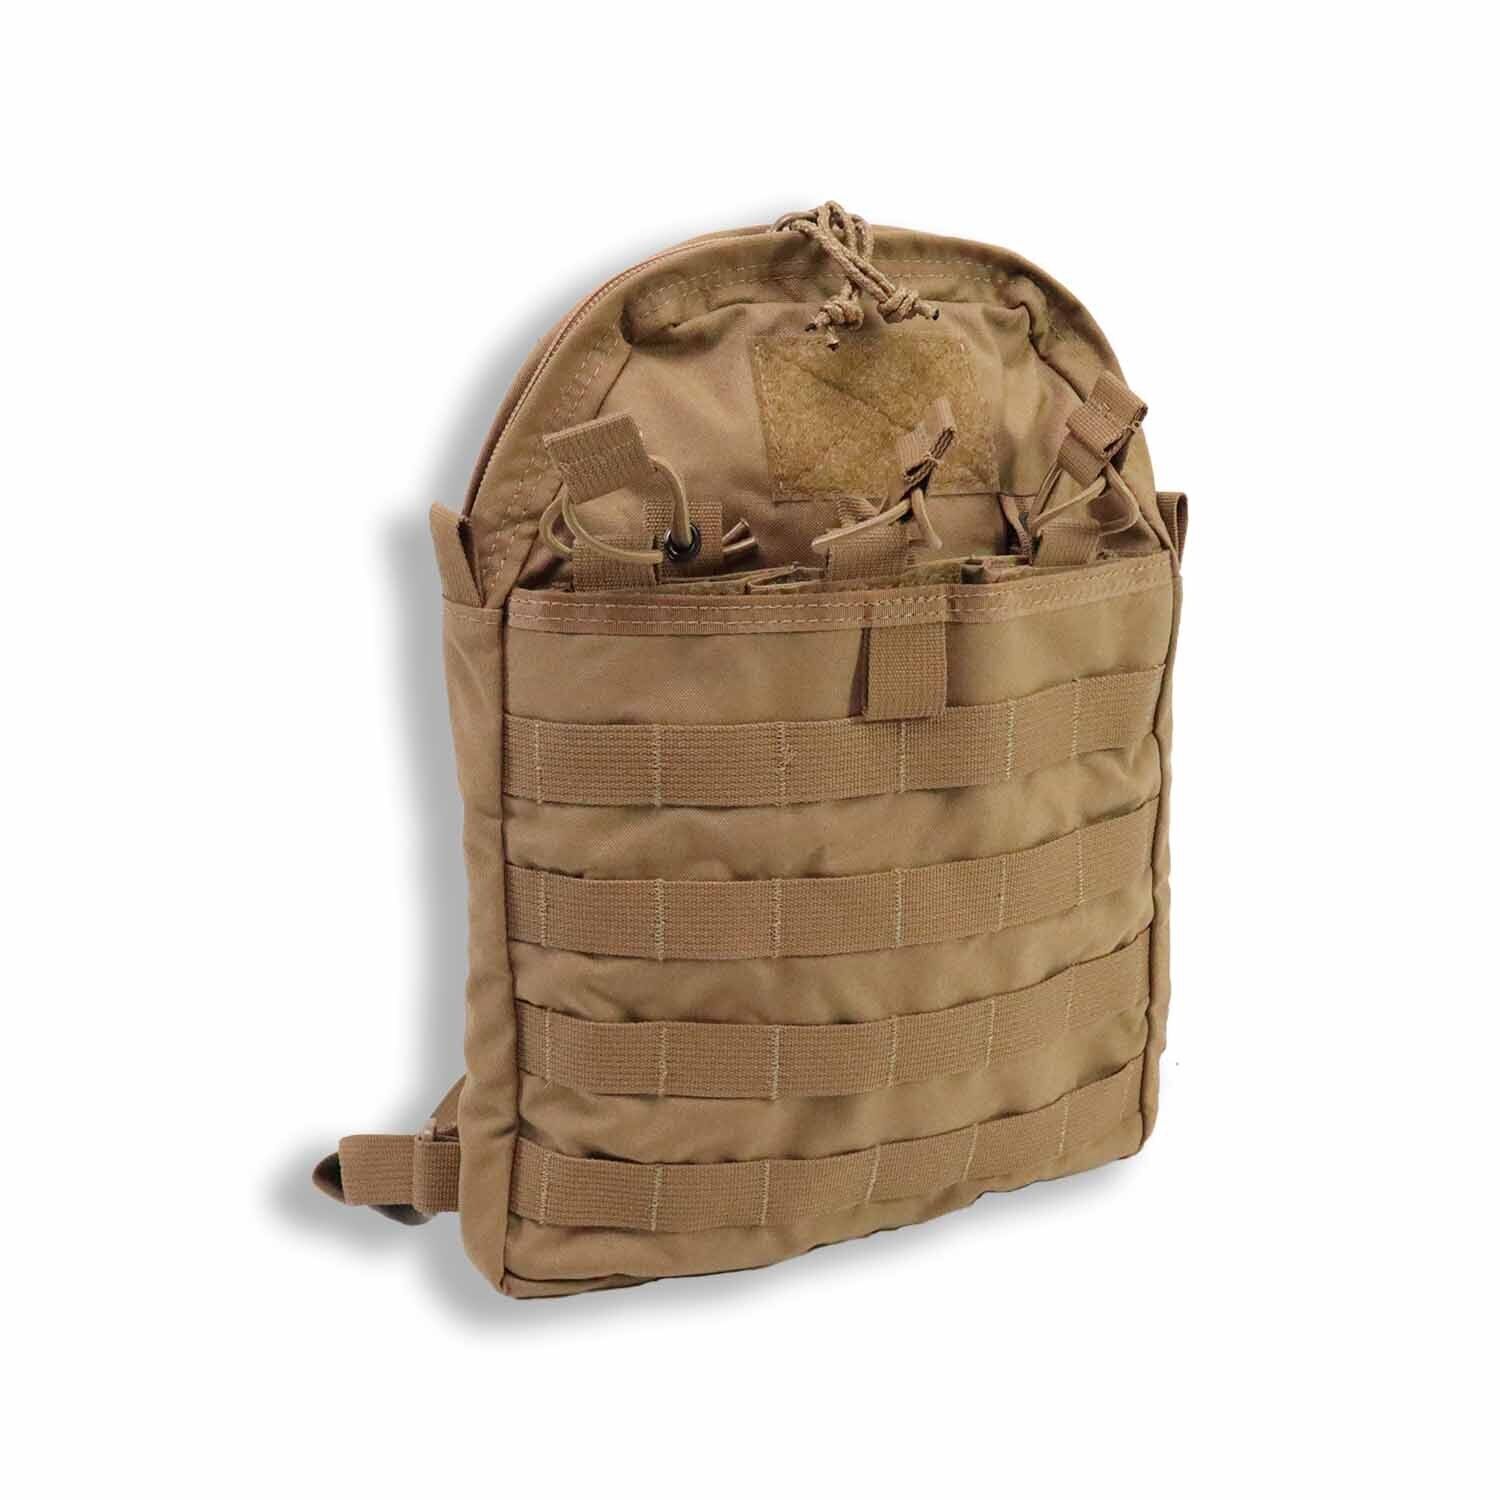 NEW T3 Gear Reload Hydration Carrier Pack - Coyote Brown